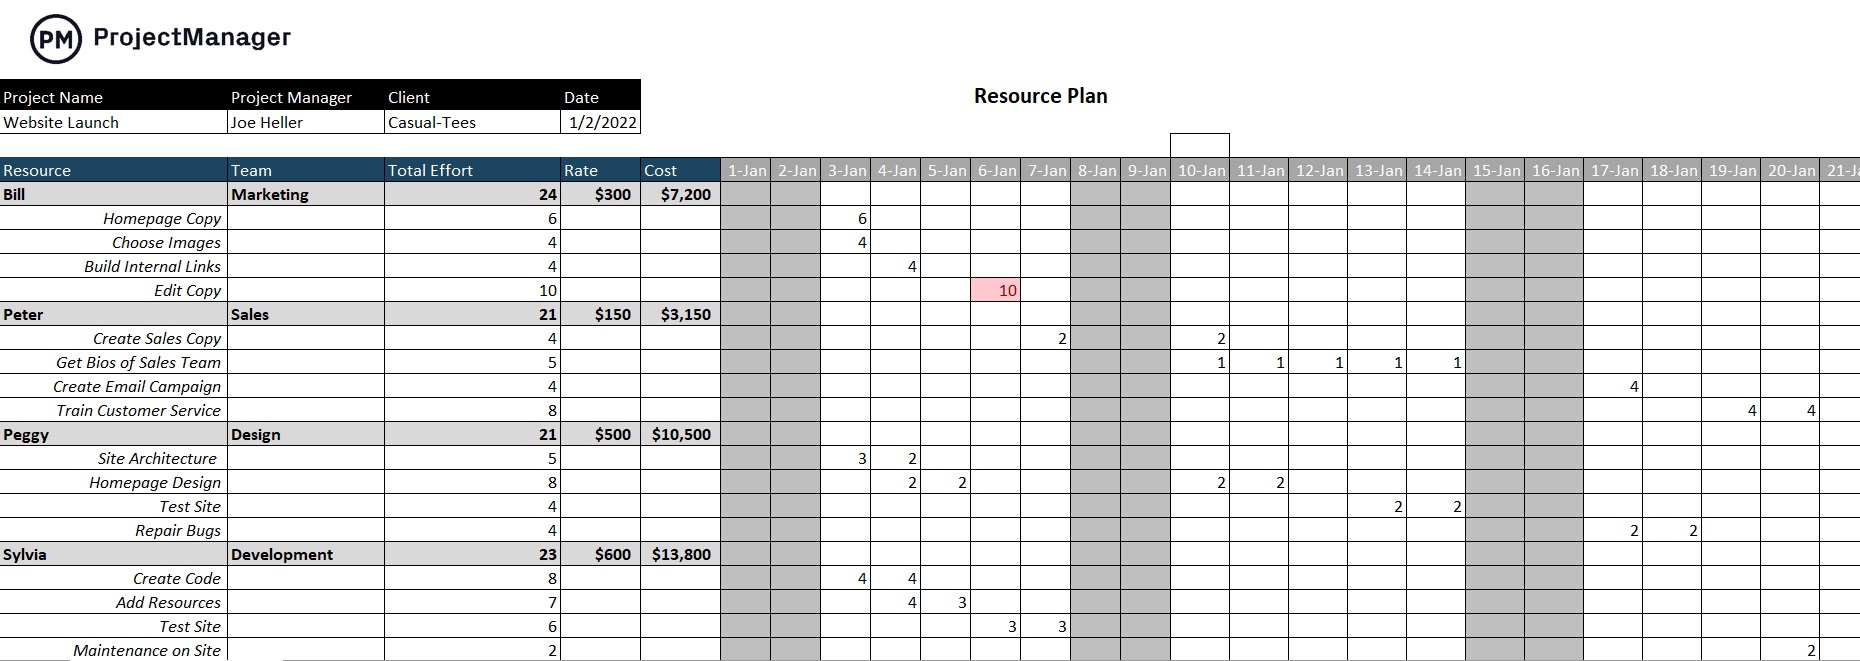 Resource Planning Template Excel